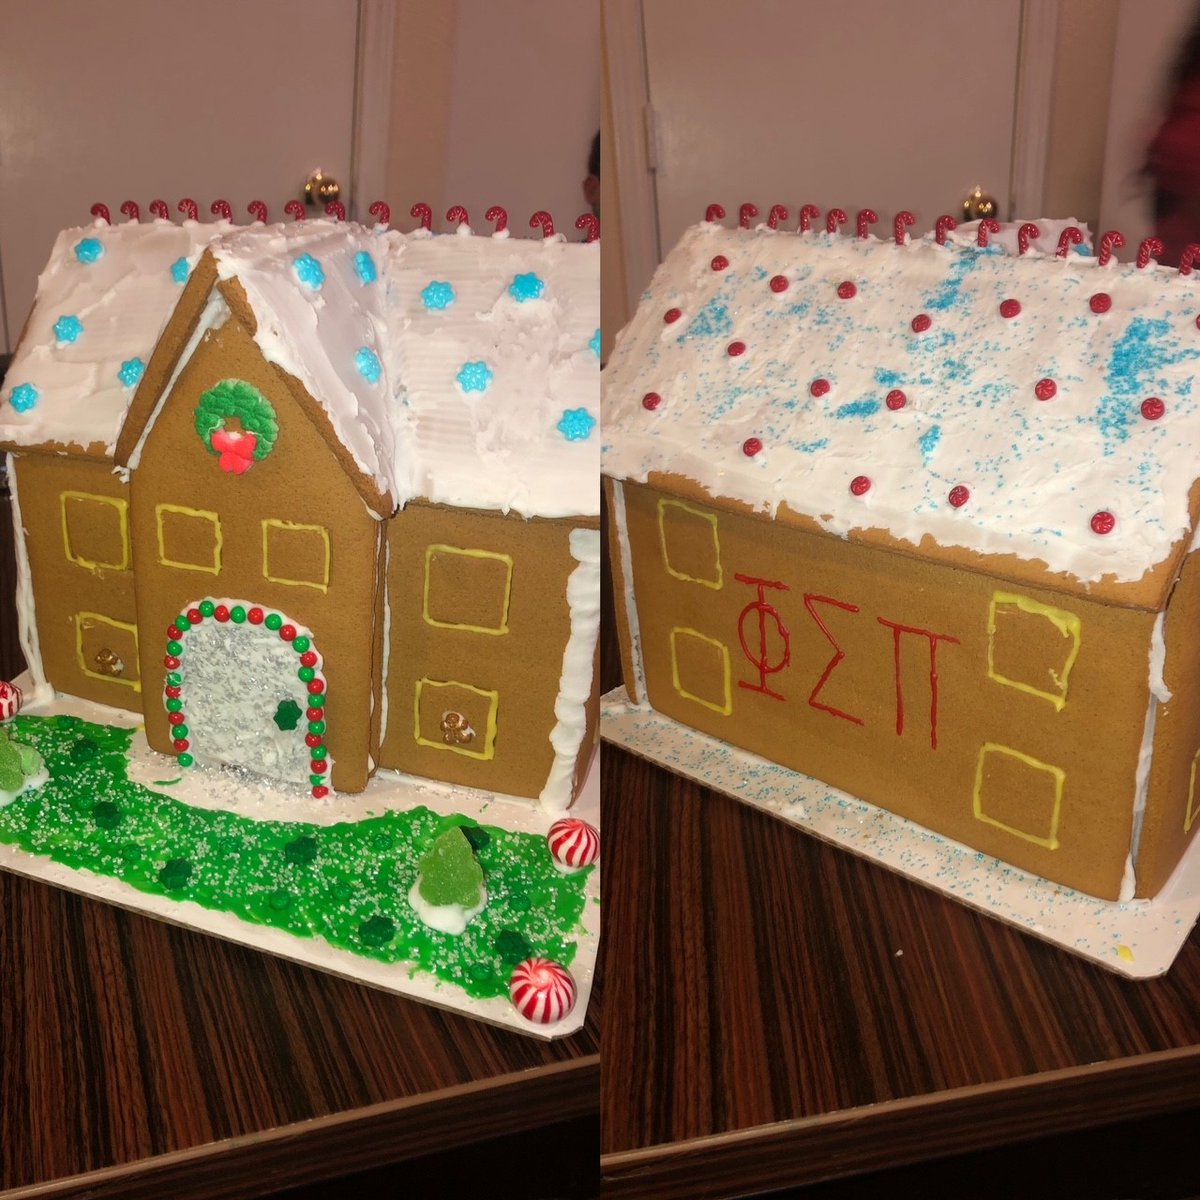 💟GINGERBREAD HOUSE #1  VOTING💟 Sugar and spice and everything nice!
Every like counts! New house to vote on tomorrow at 12pm.
•
•
•
#deltaphire #PSP #TXST #leadership #fellowship #scholarship #gingerbreadhouse #contest #whonailedit